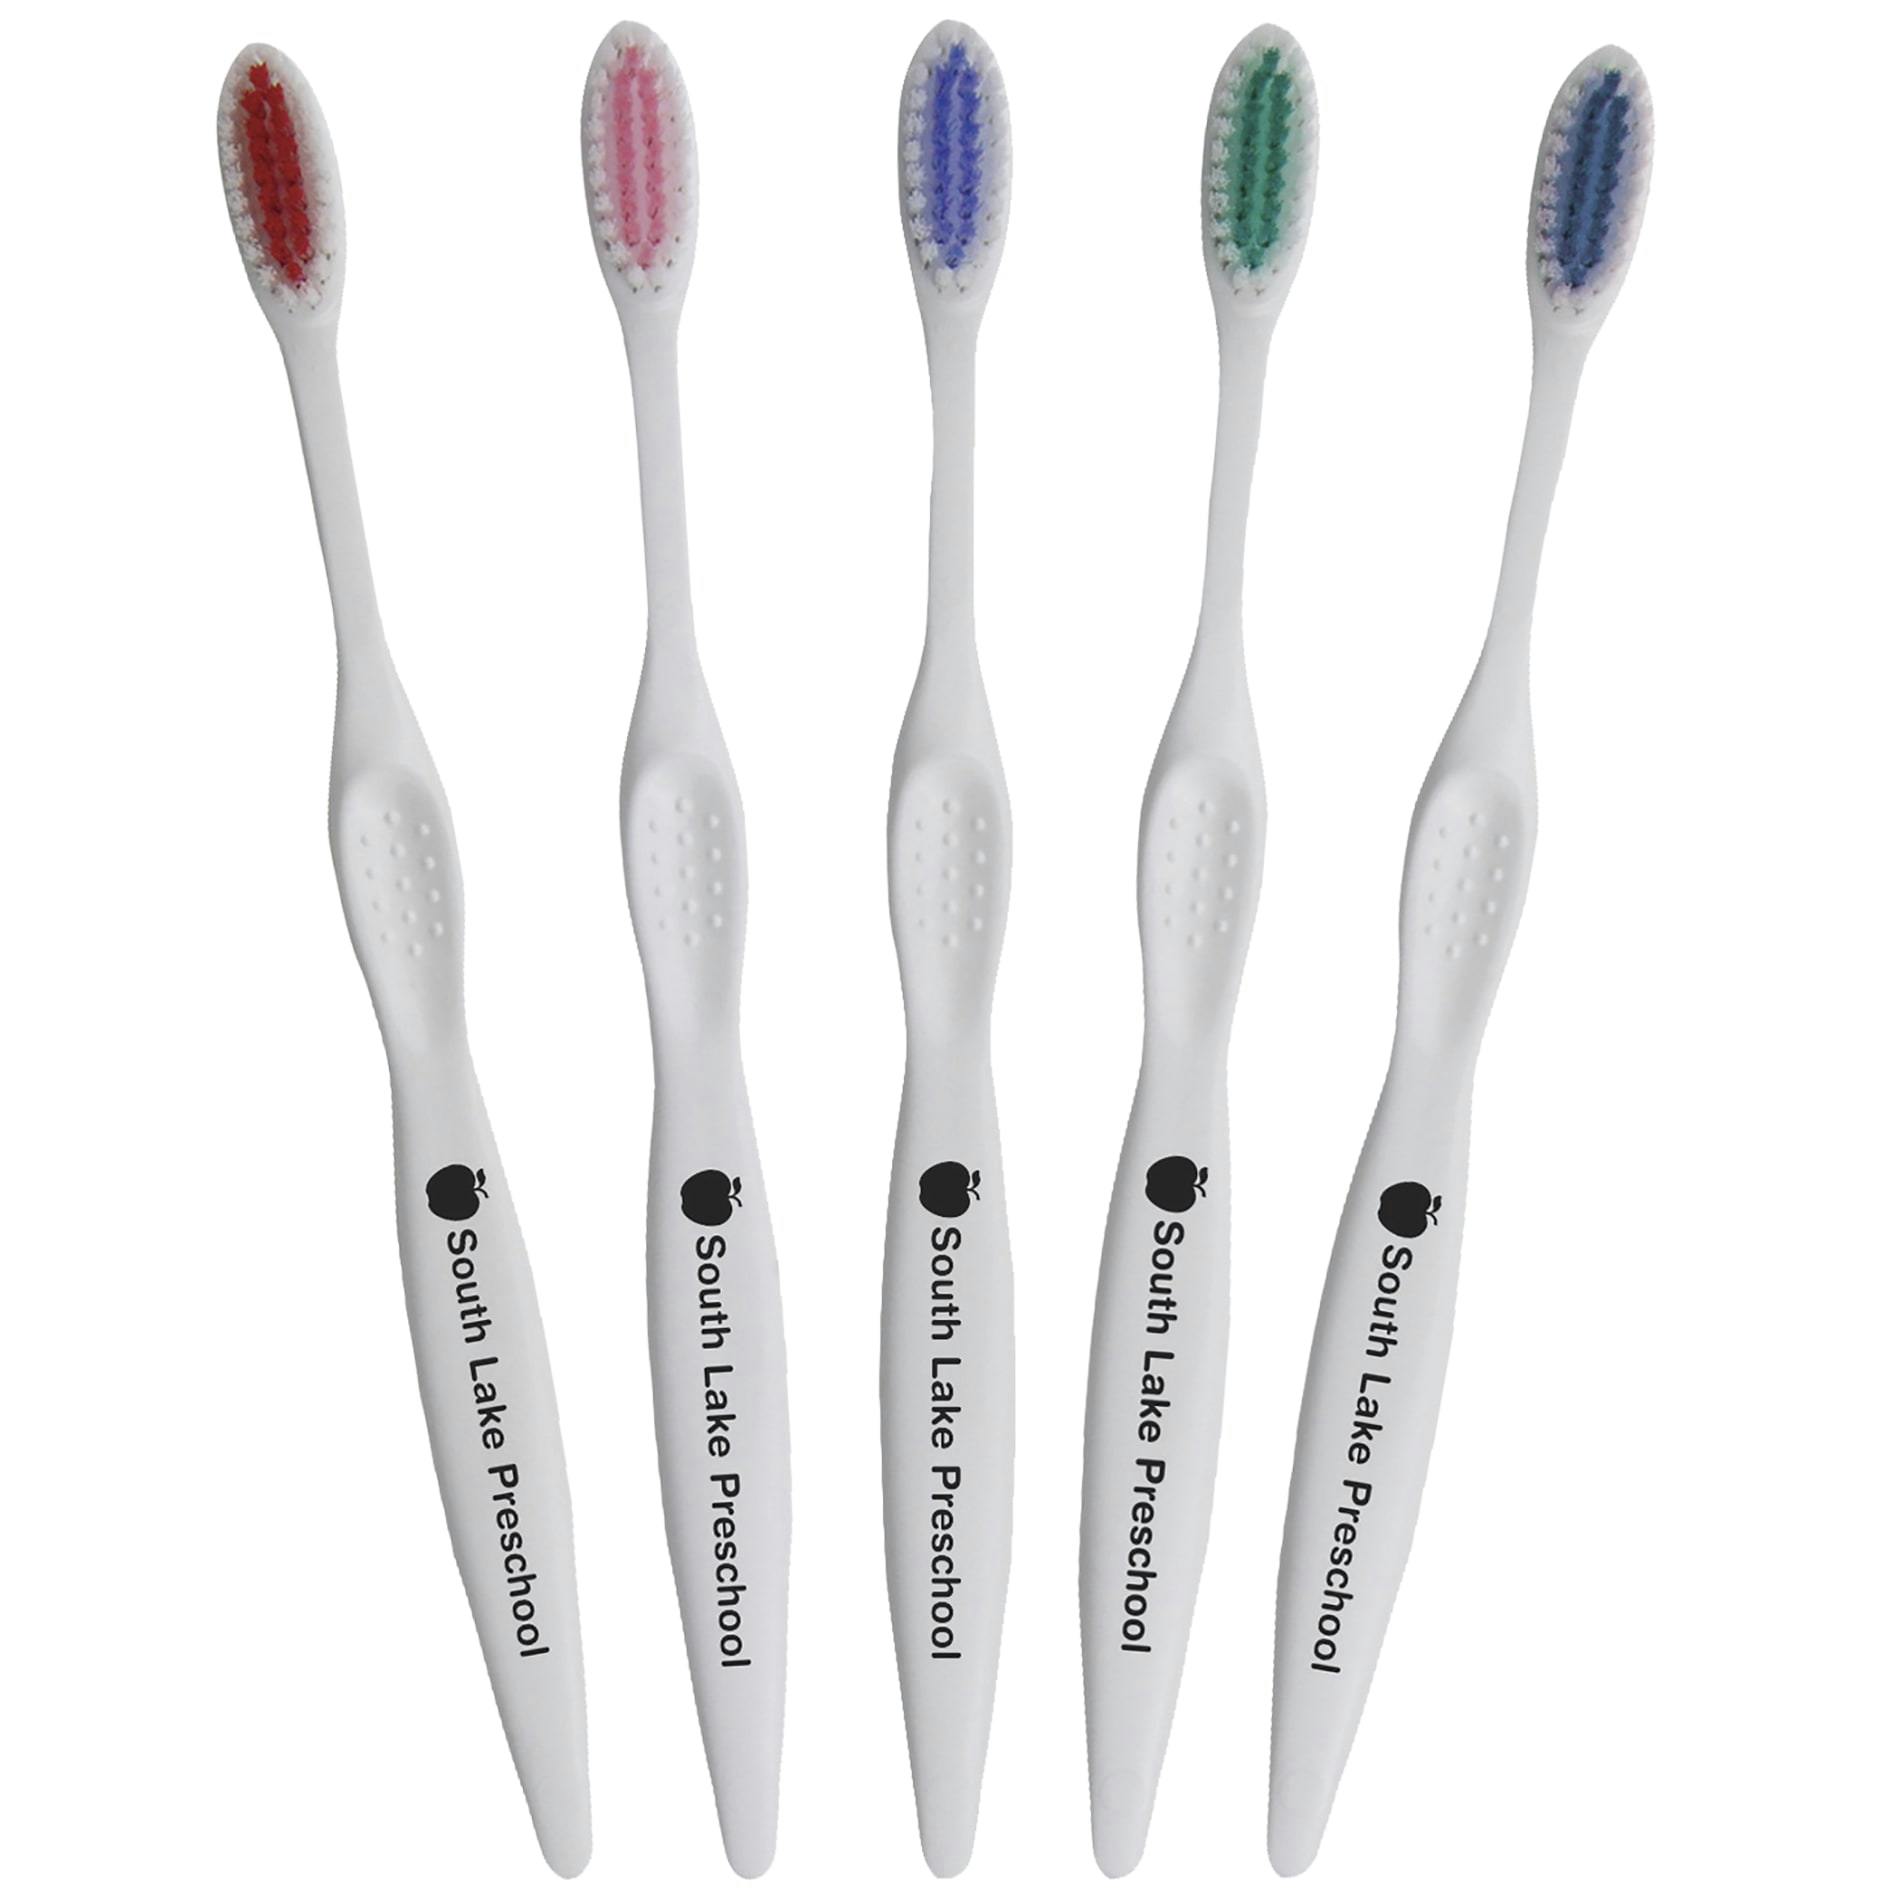 Concept Curve White Toothbrush - additional Image 1